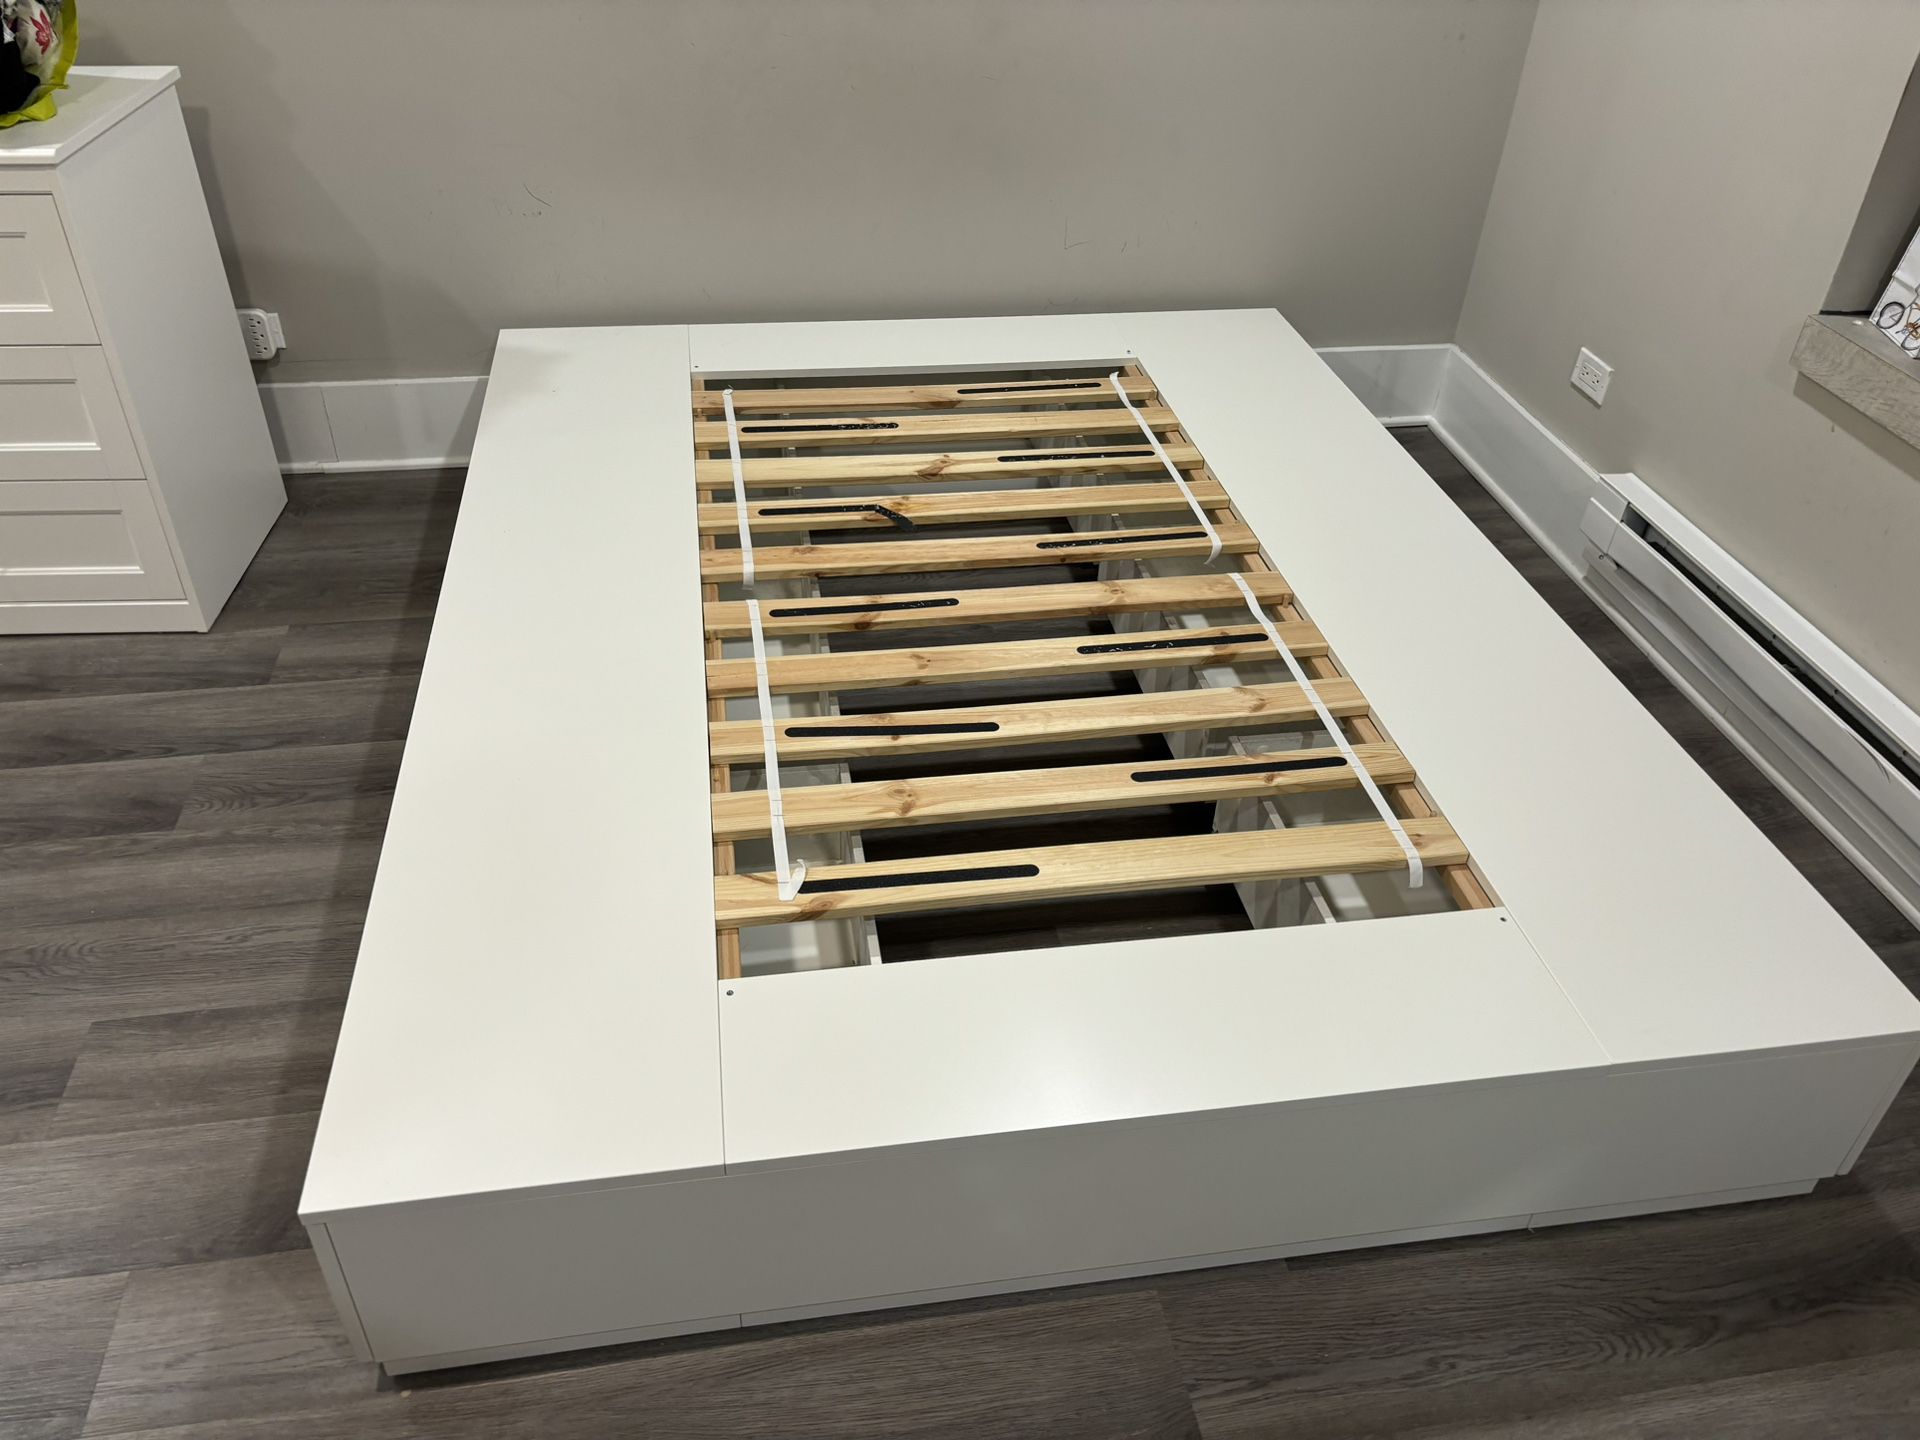 Queen Bed Frame with Storage